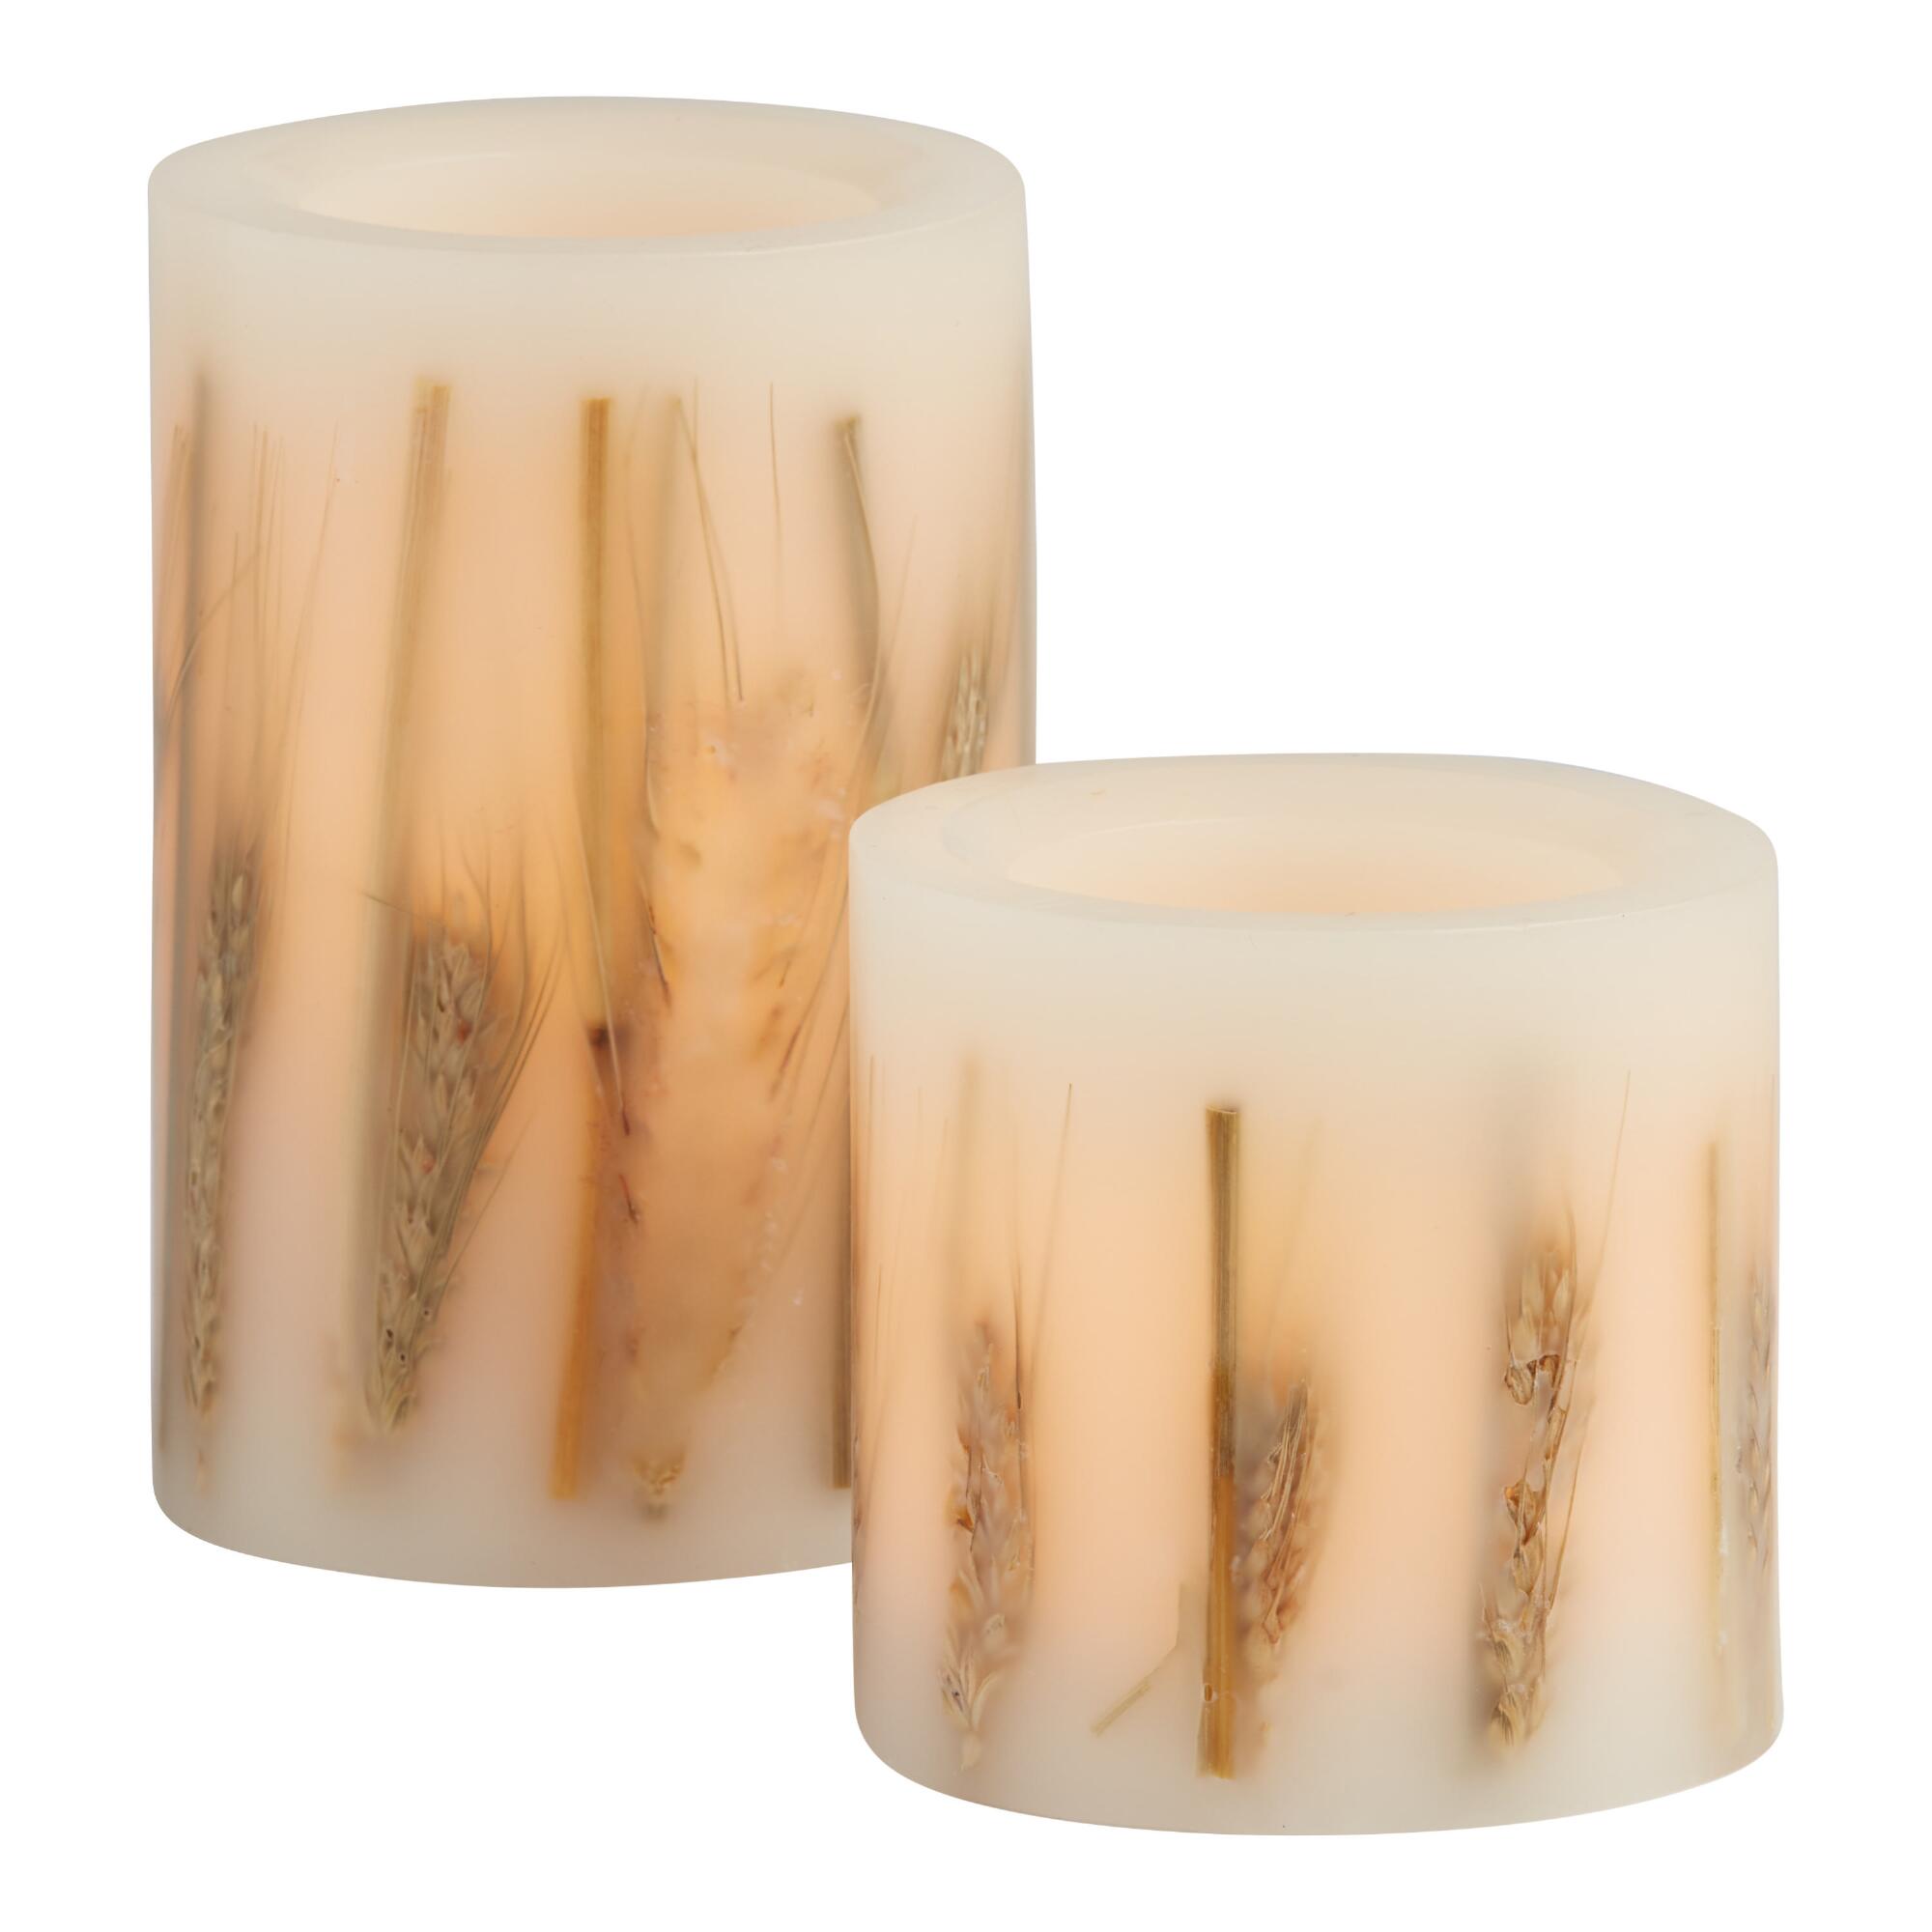 Ivory Embedded Wheat Flameless LED Pillar Candle: Natural - Plastic by World Market